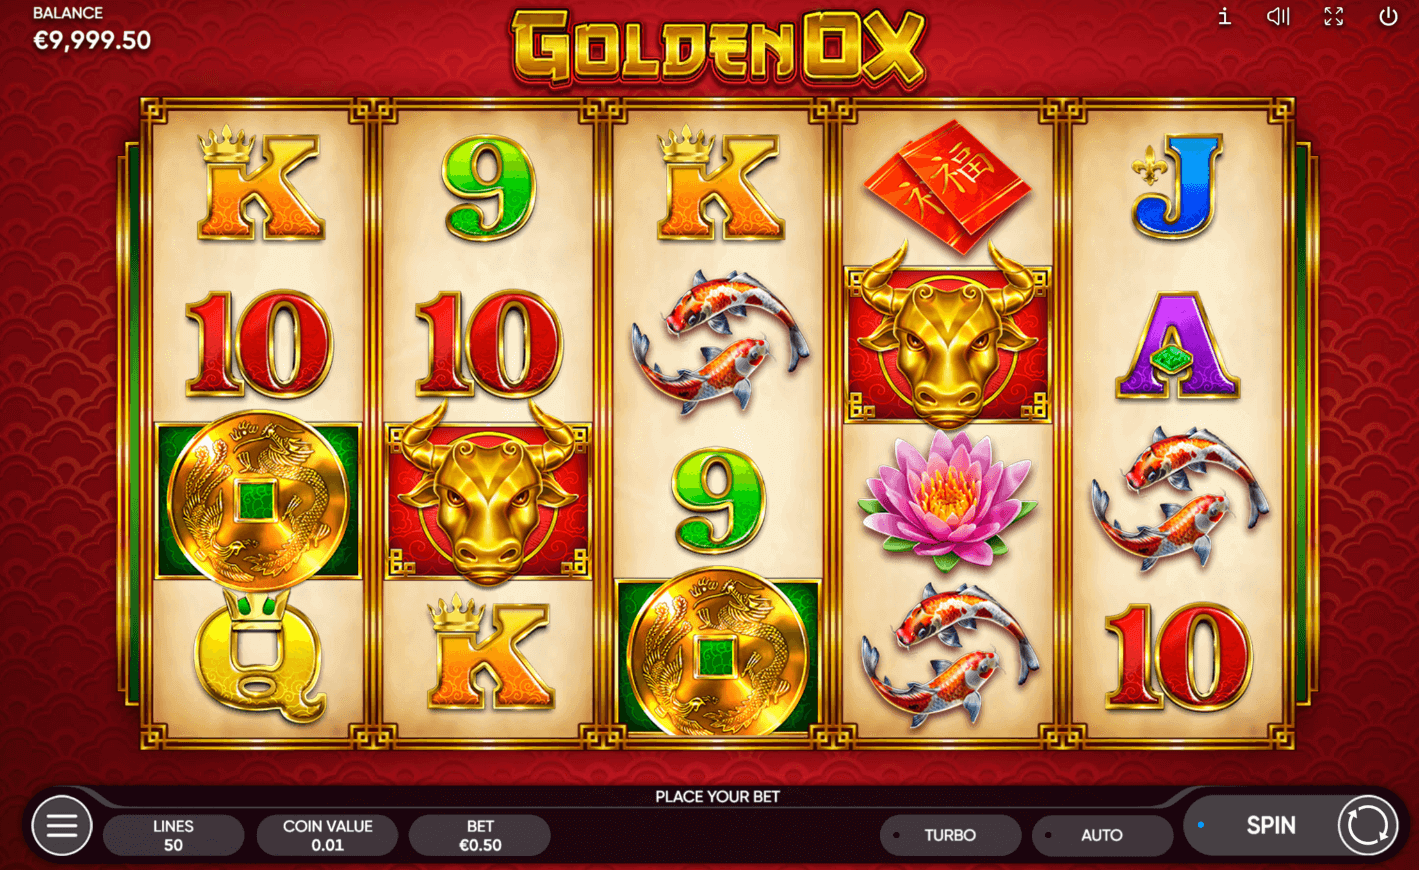 2021 03 18 00 13 17 Enjoy the Golden Ox slot from Endorphina